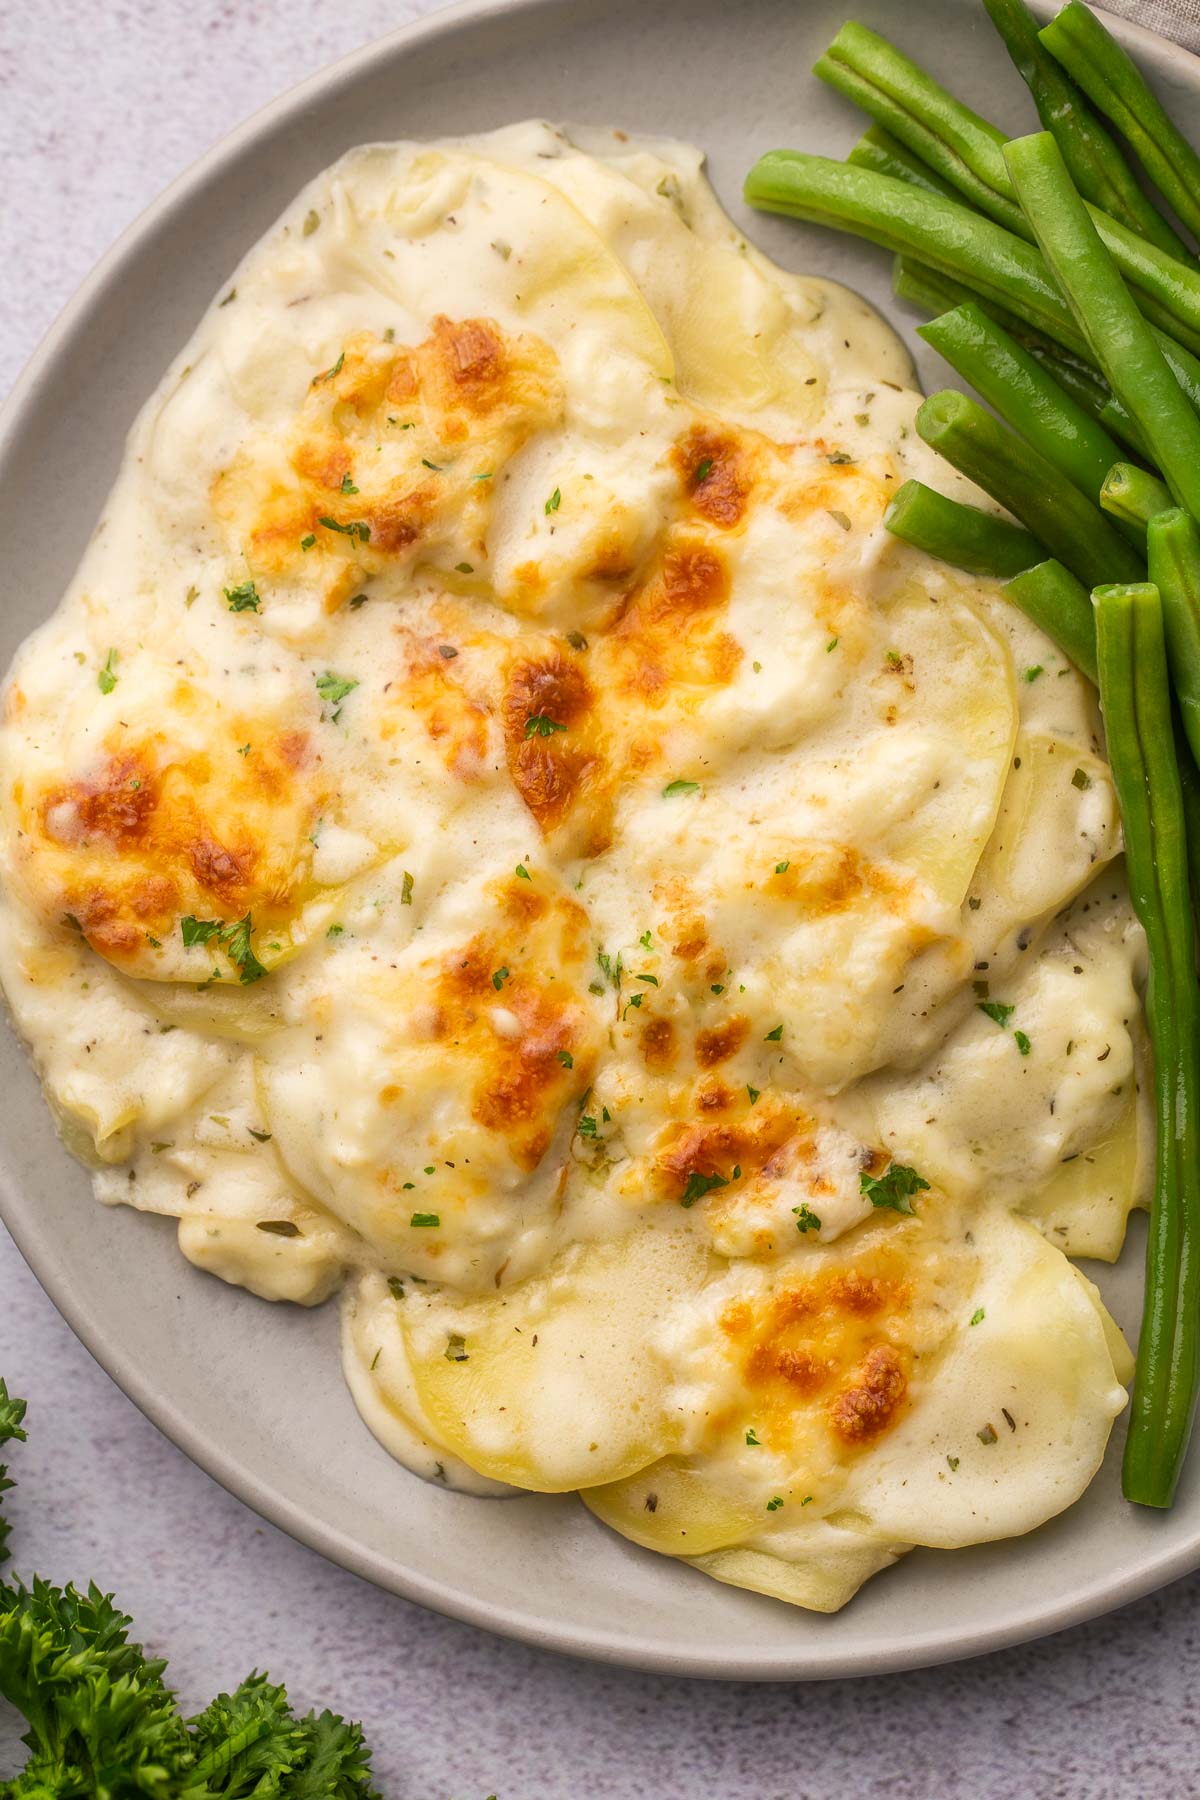 plate of cheesy scalloped potatoes with green beans on the side.